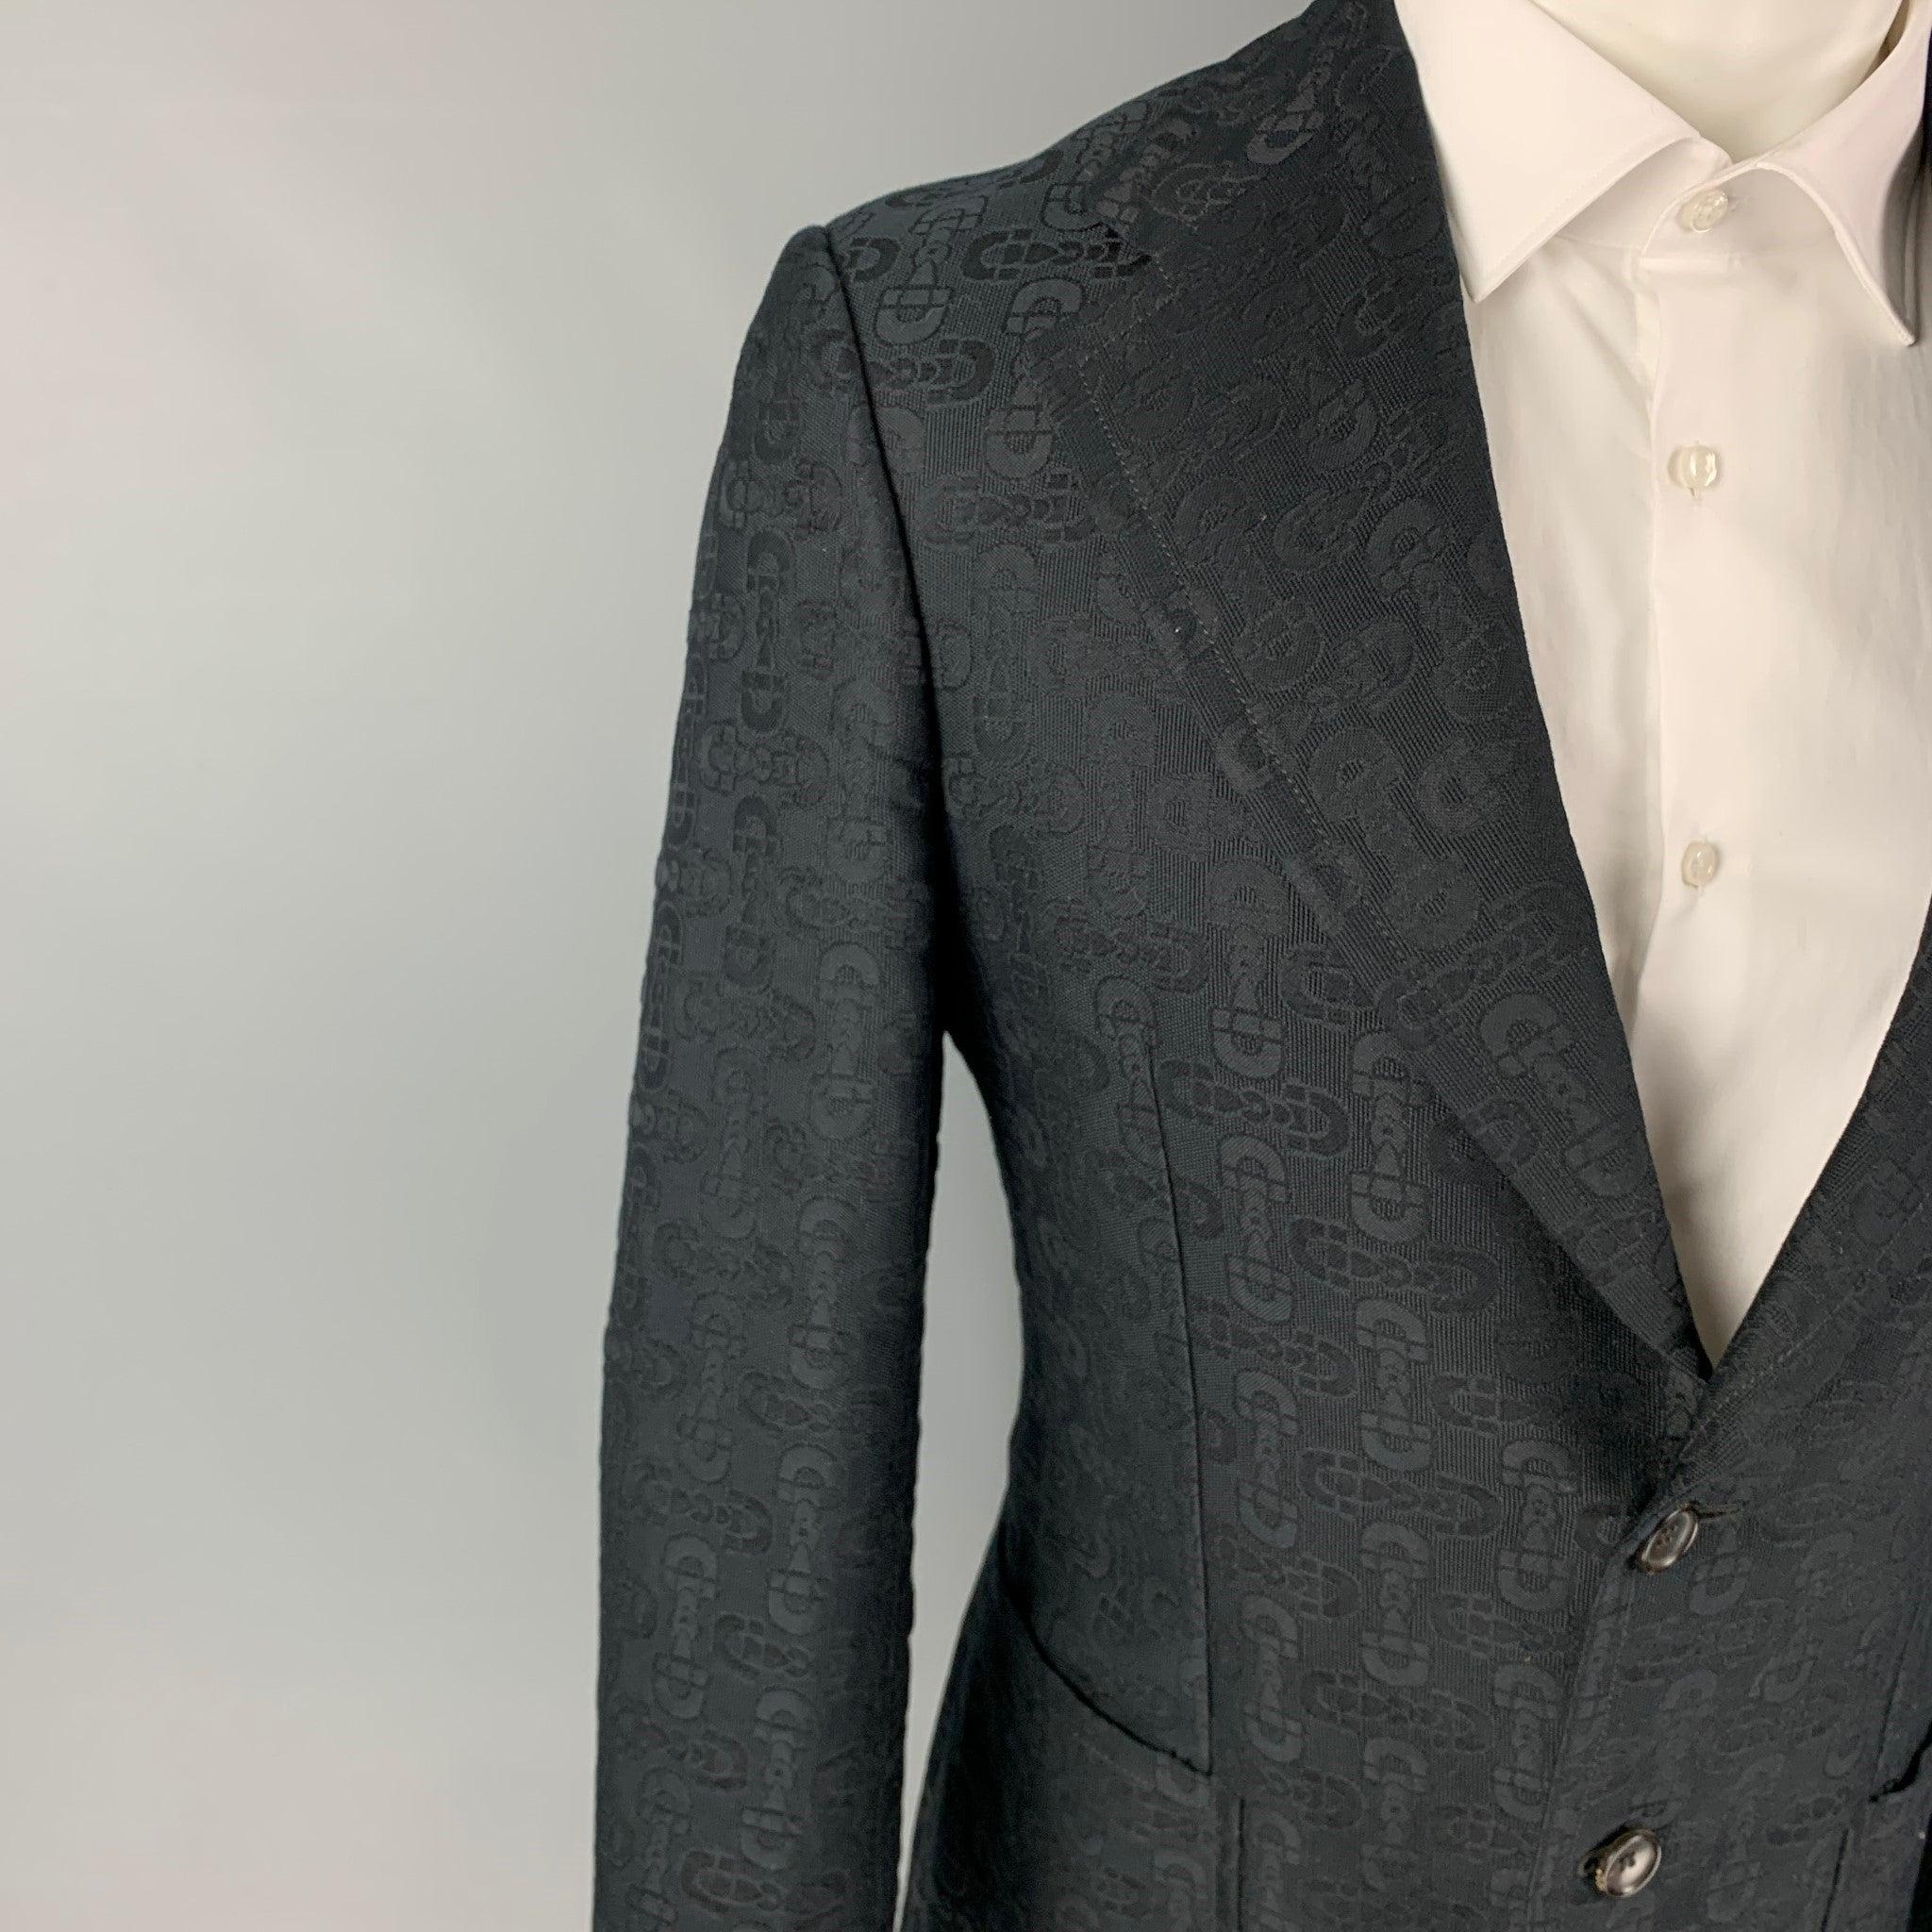 GUCCI by TOM FORD sport coat comes in a black jacquard cotton / silk with a full liner featuring a notch lapel, patch pockets, double back vent, and a double button closure.
Excellent
Pre-Owned Condition.  

Marked:   46 R 

Measurements: 
